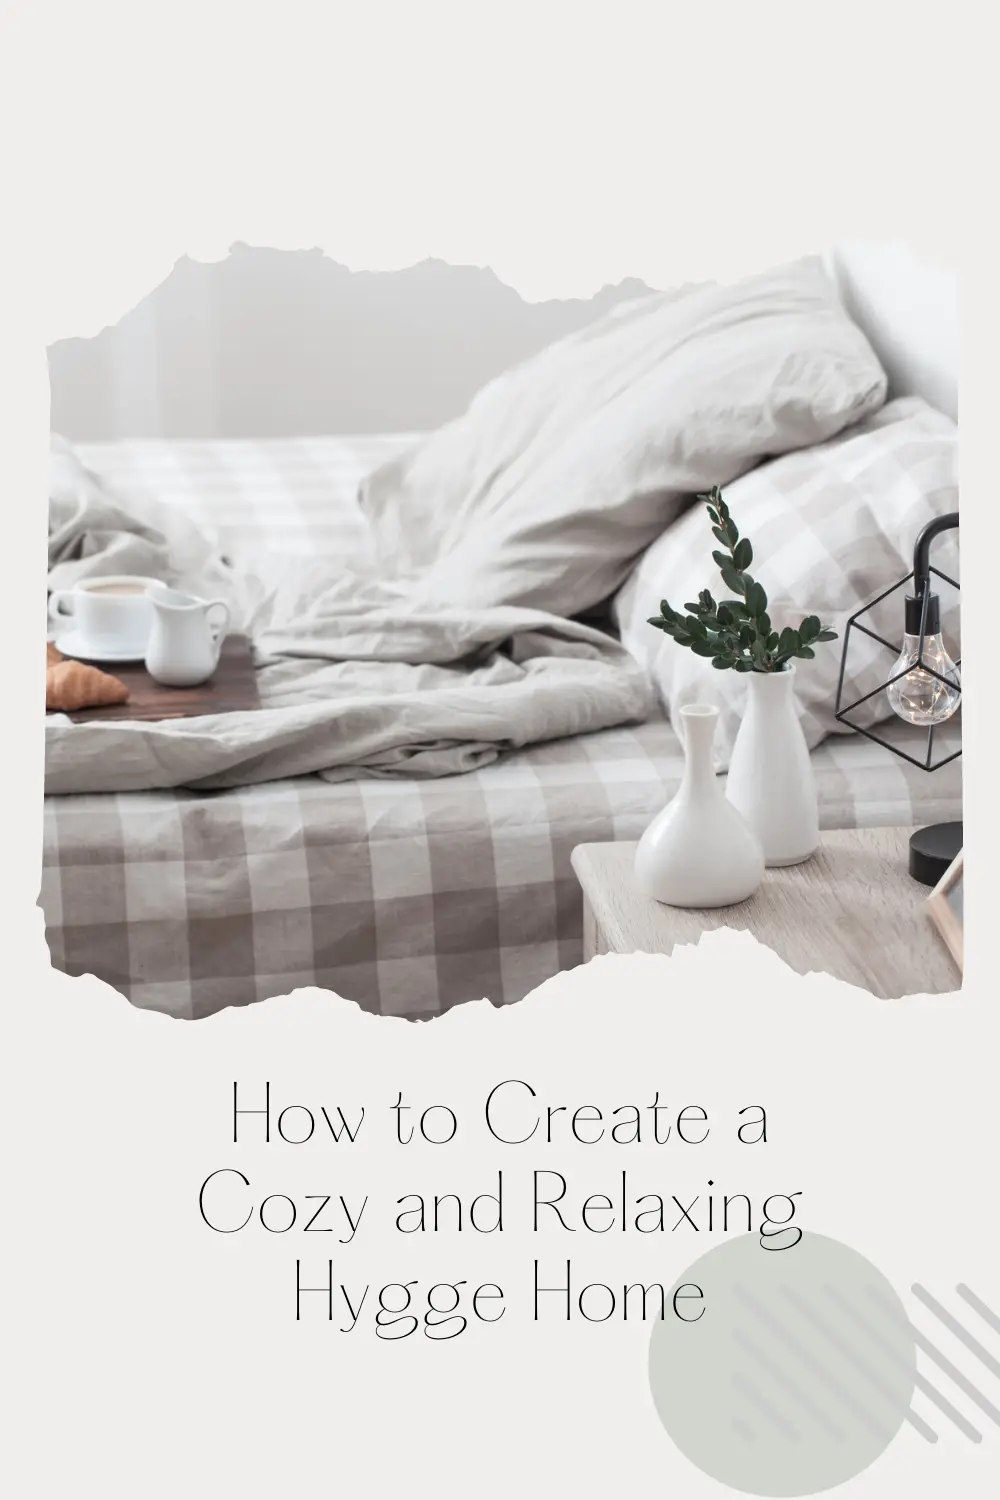 How to create a cozy and relaxing hygge home